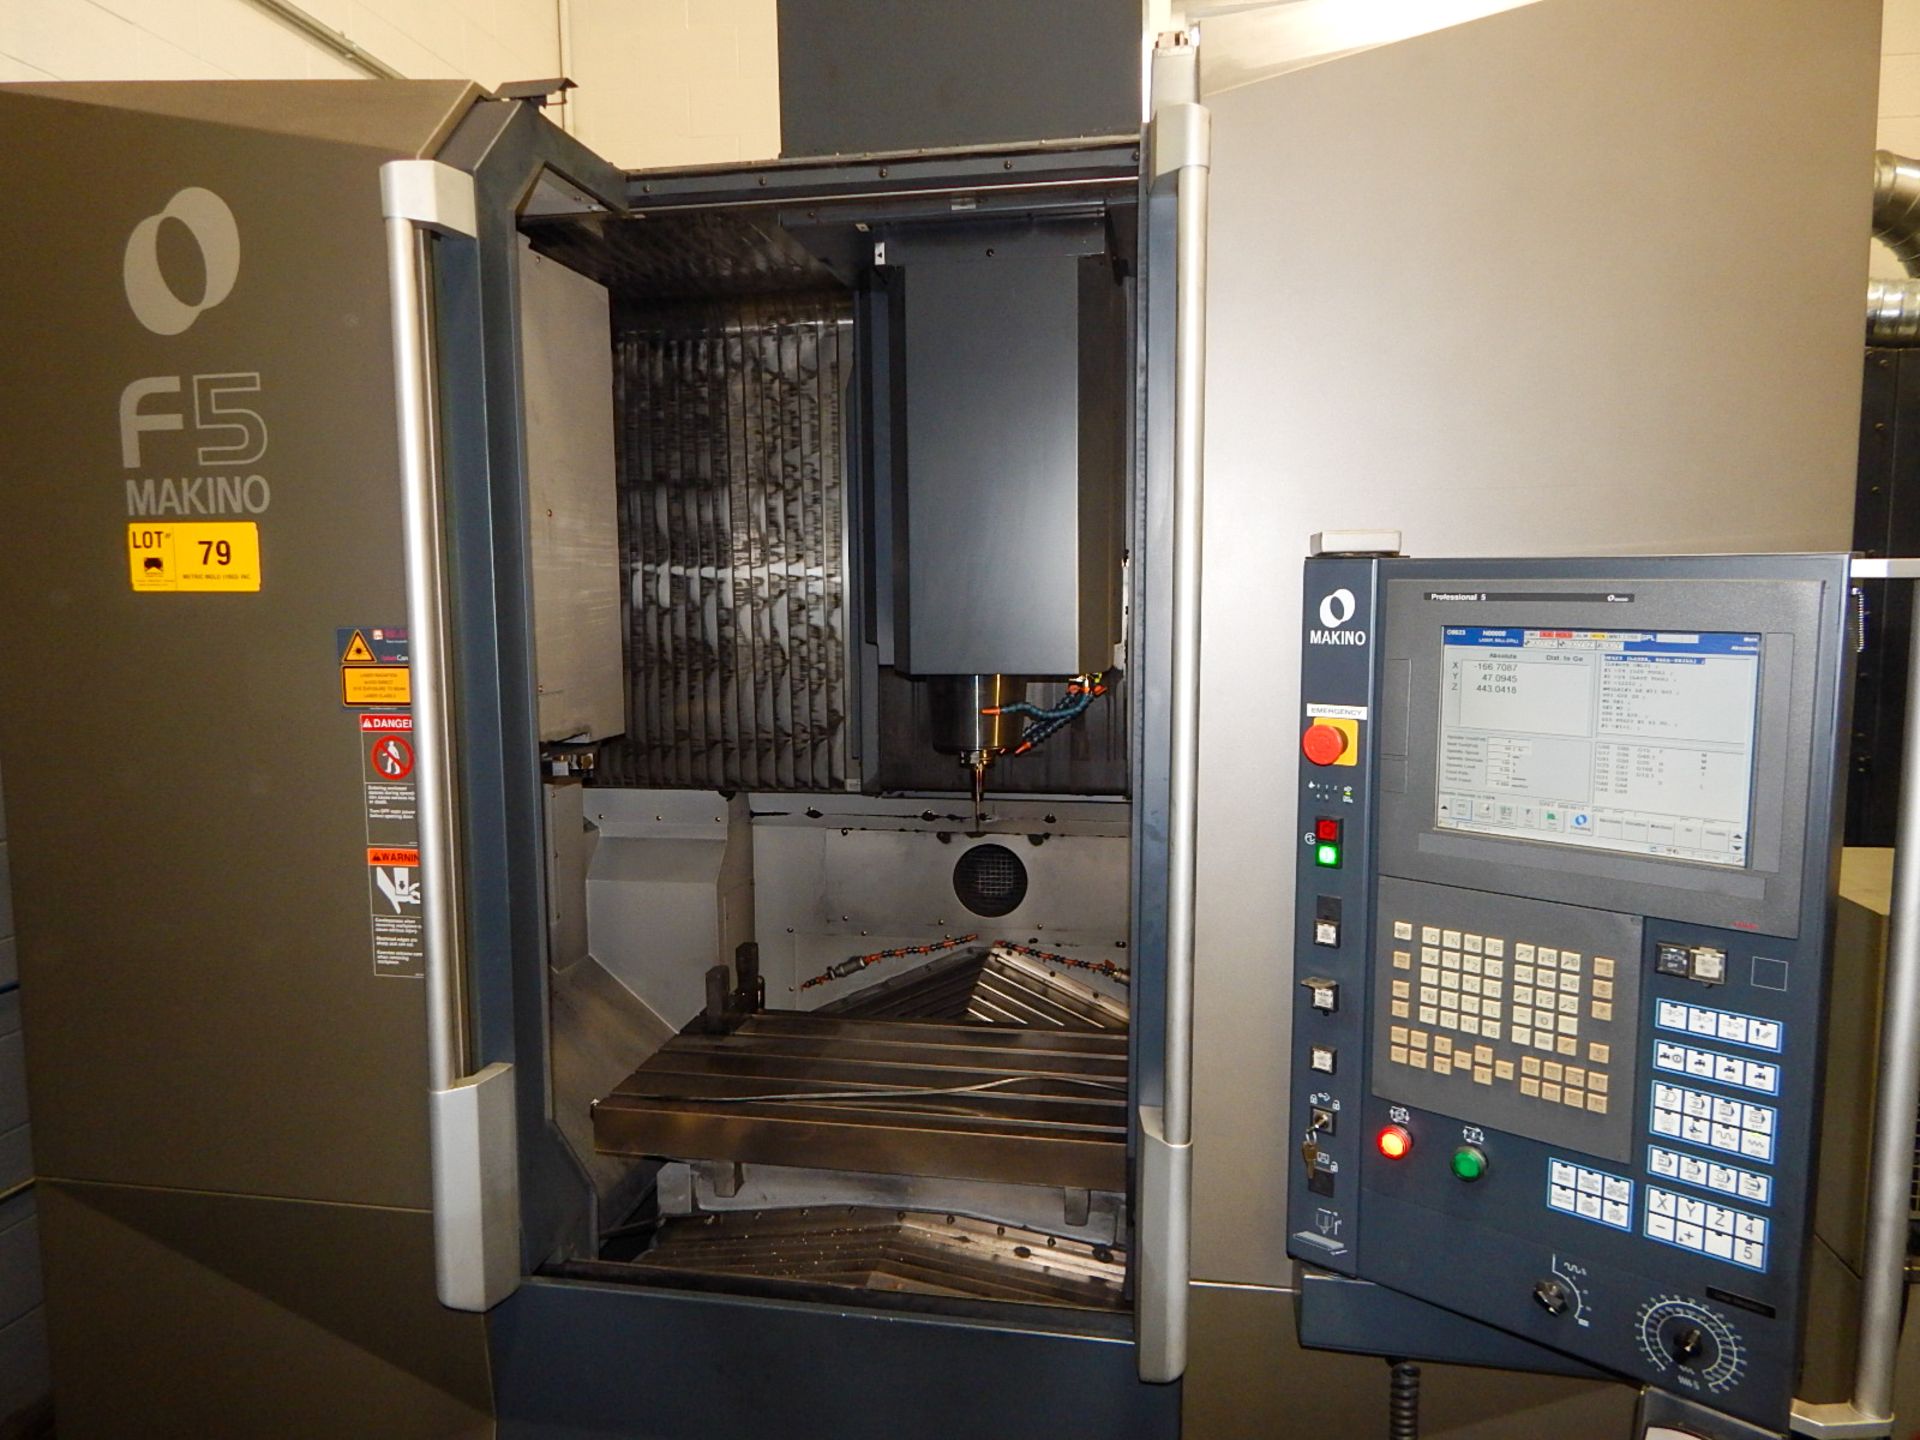 MAKINO (2014) F5 HIGH SPEED CNC VERTICAL MACHINING CENTER WITH MAKINO PROFESSIONAL 5 CNC CONTROL, - Image 5 of 7